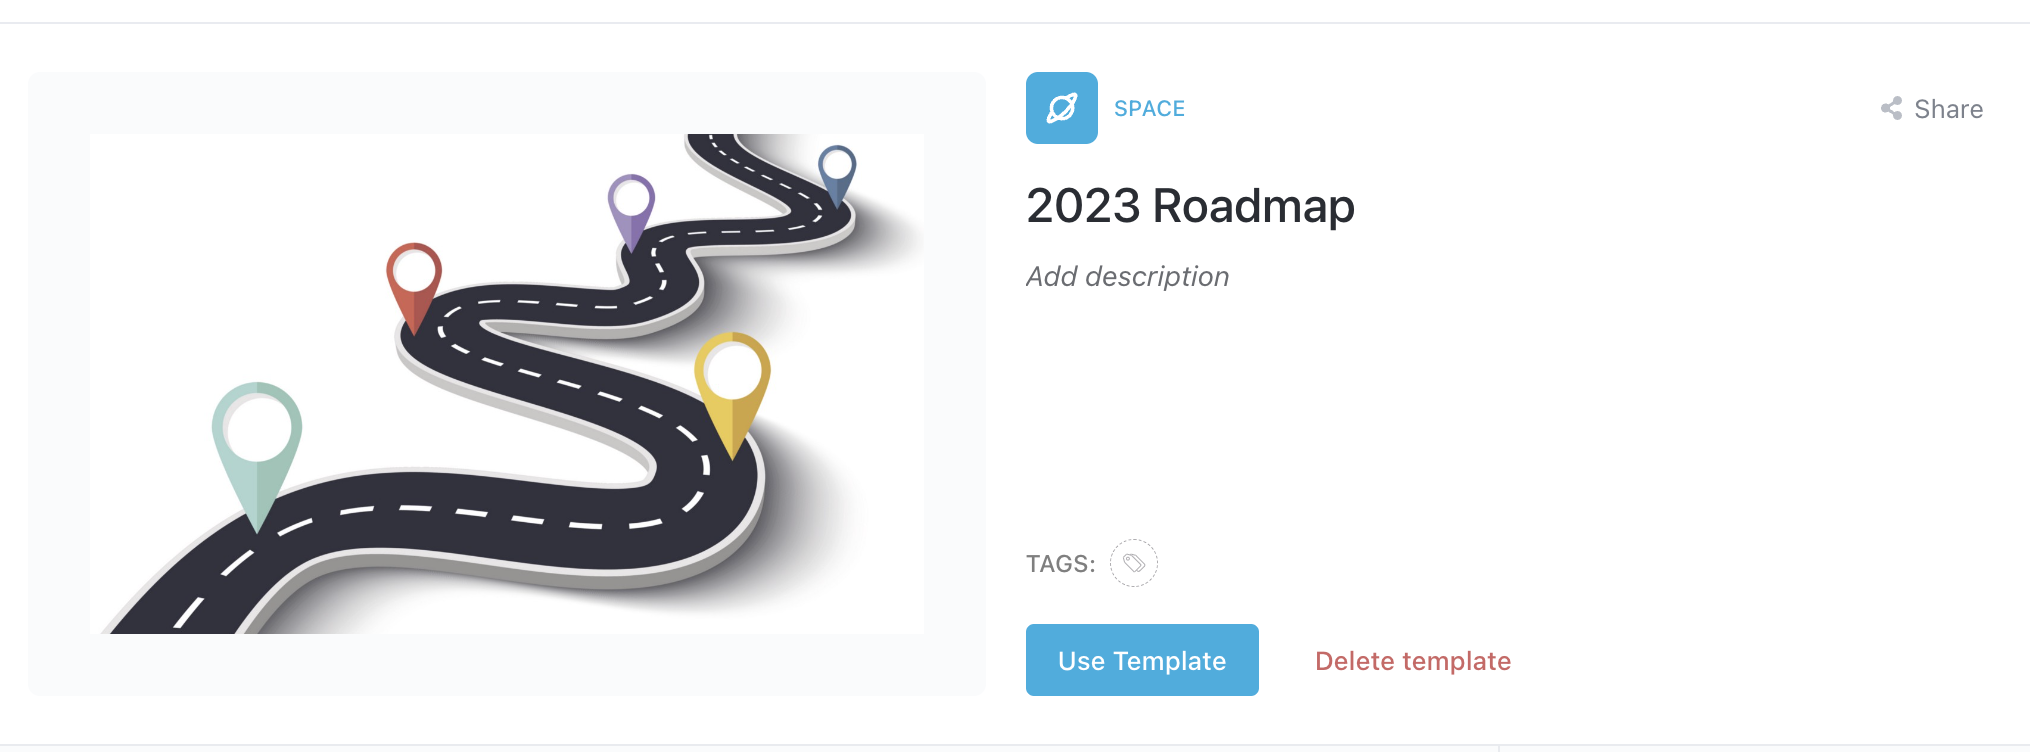 Screenshot of a template using an image of a road with milestone markers on a Roadmap Template.